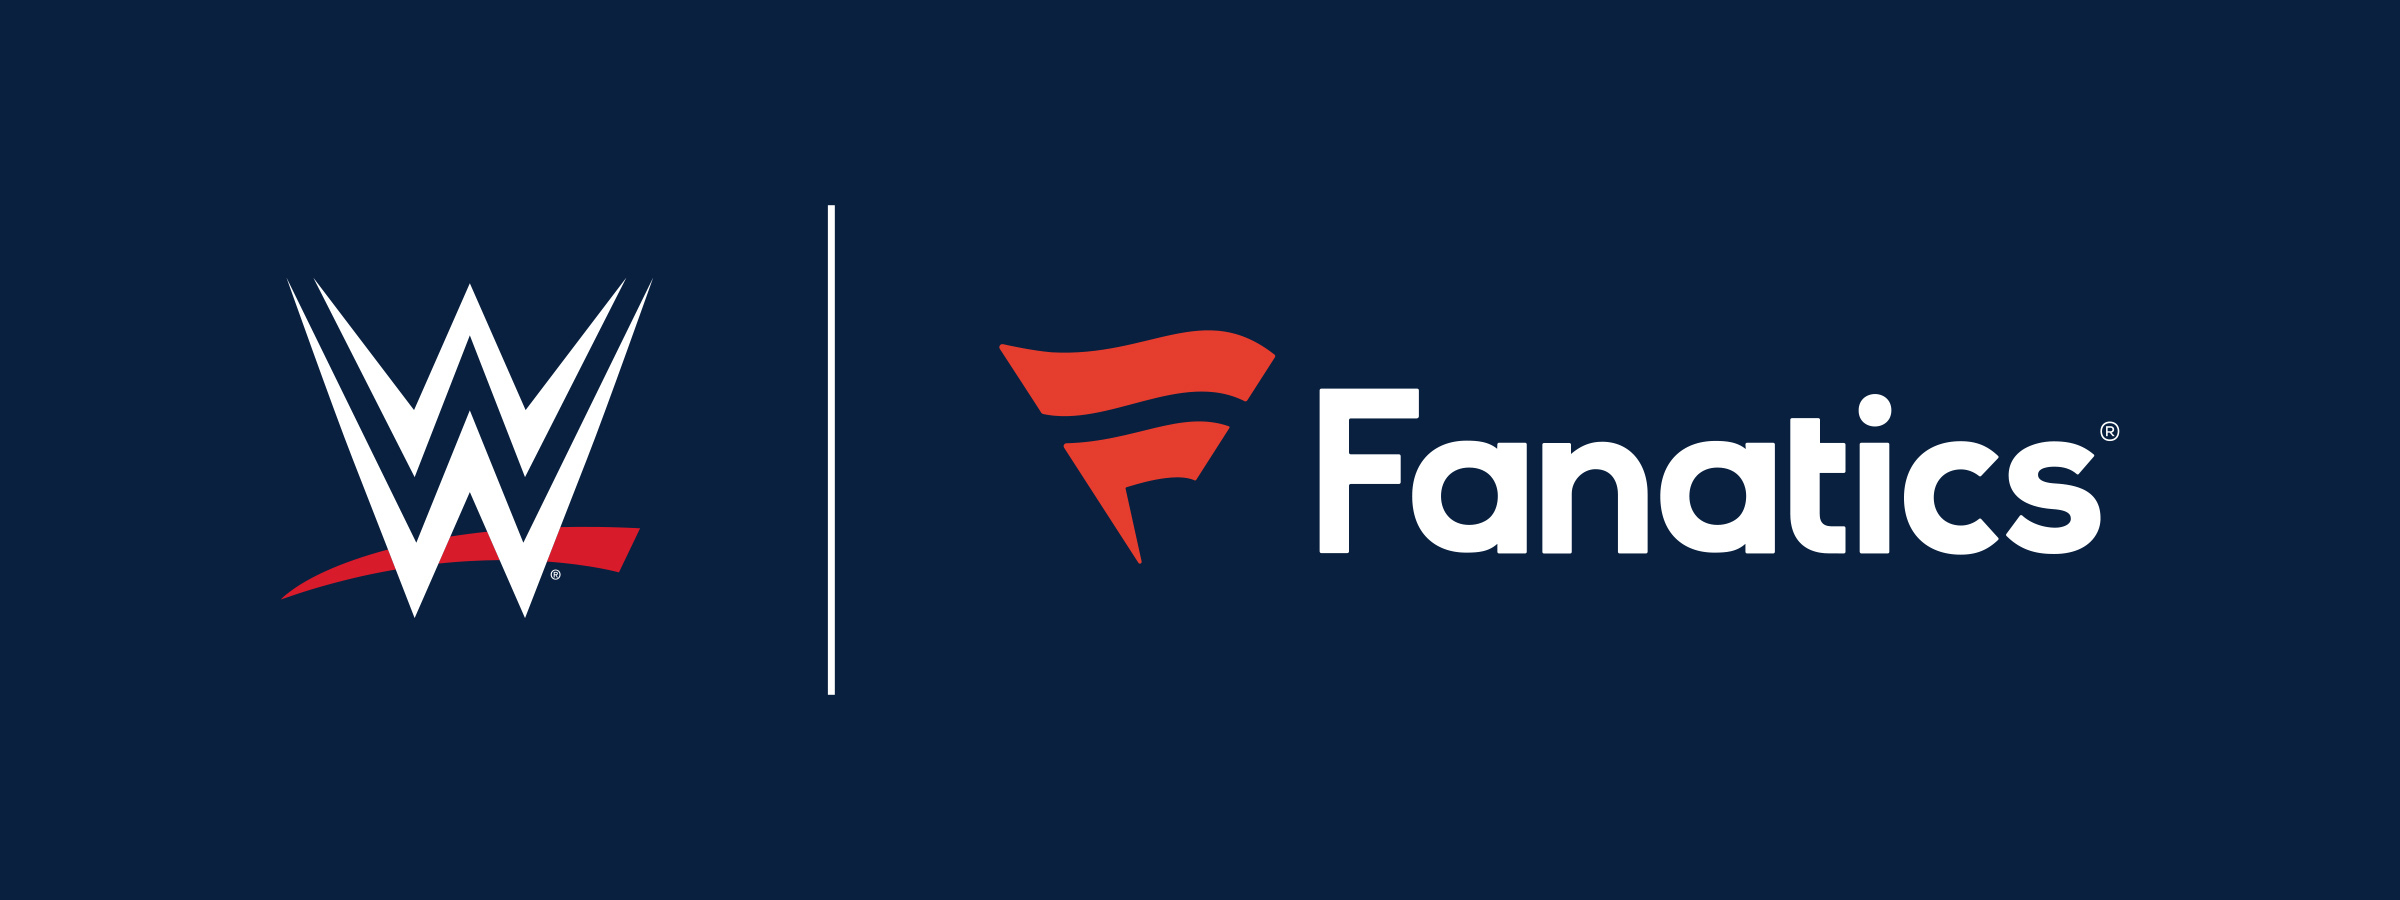 wwe® and fanatics announce long-term sports platform partnership across e-commerce, licensed merchandise, trading cards and nfts | business wire